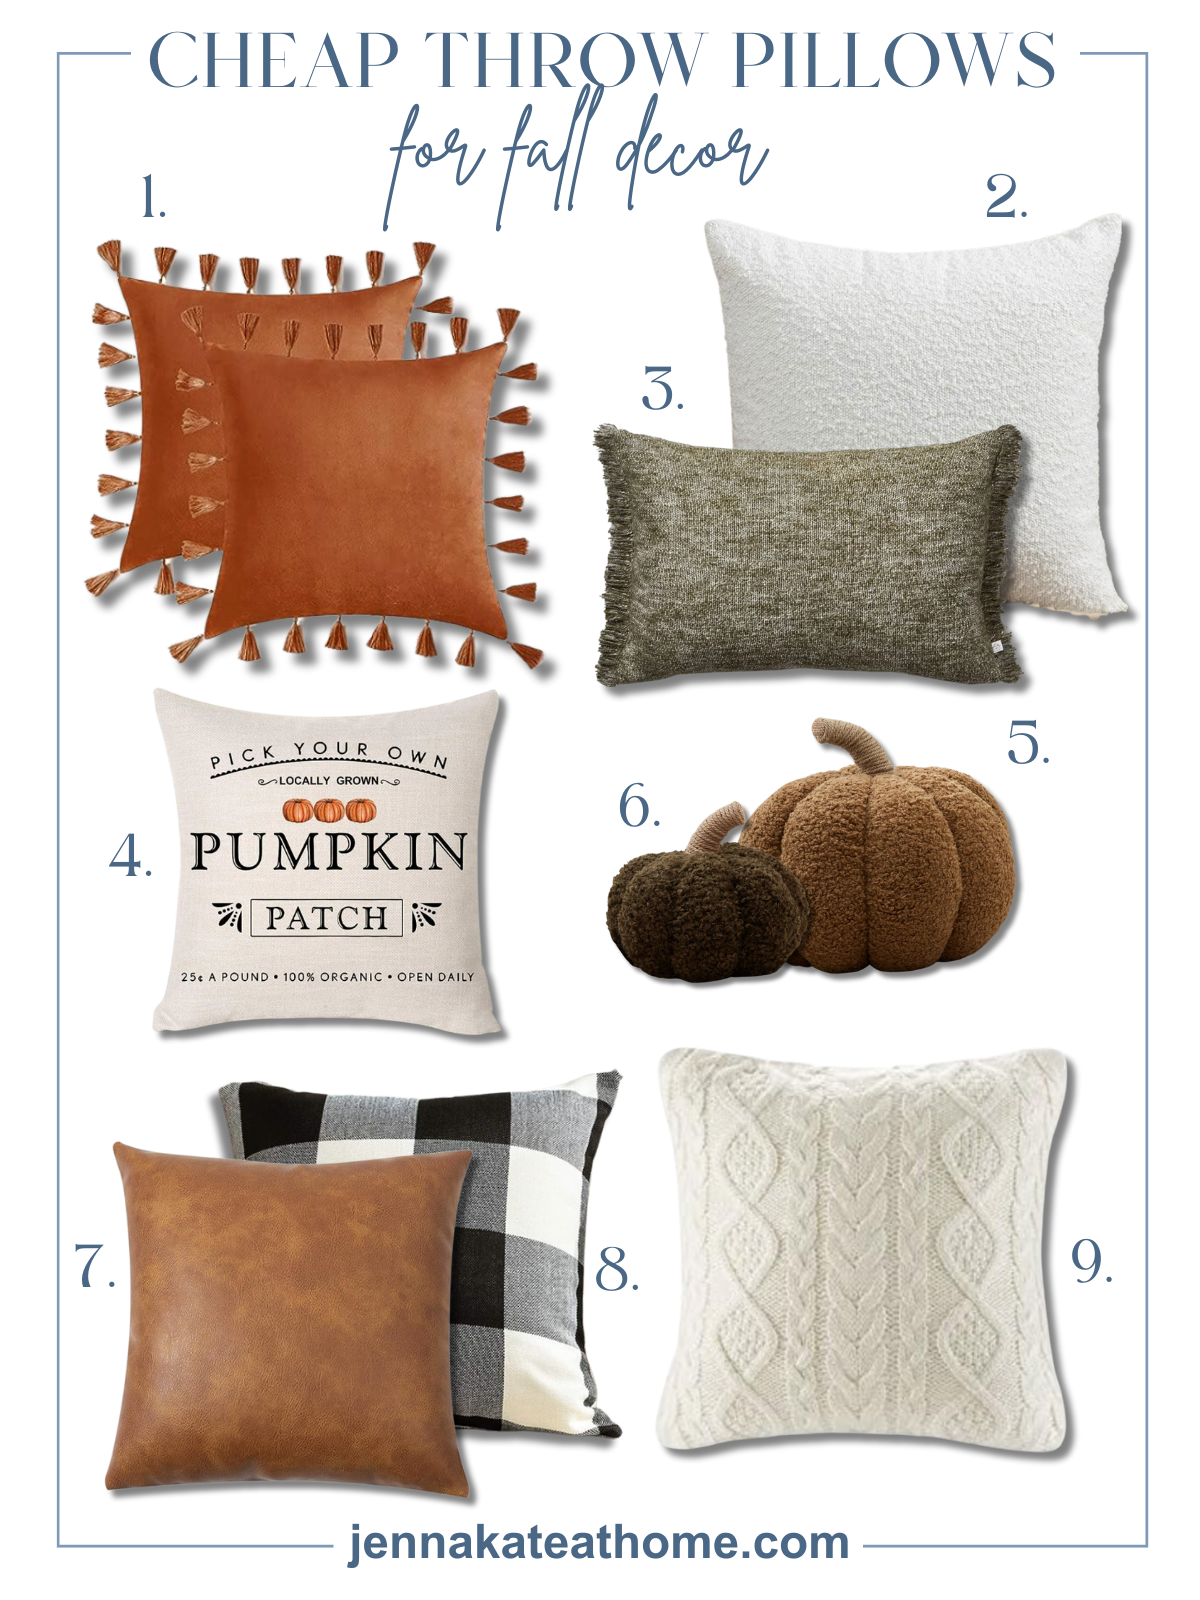 a collage of my favorite affordable throw pillows for fall